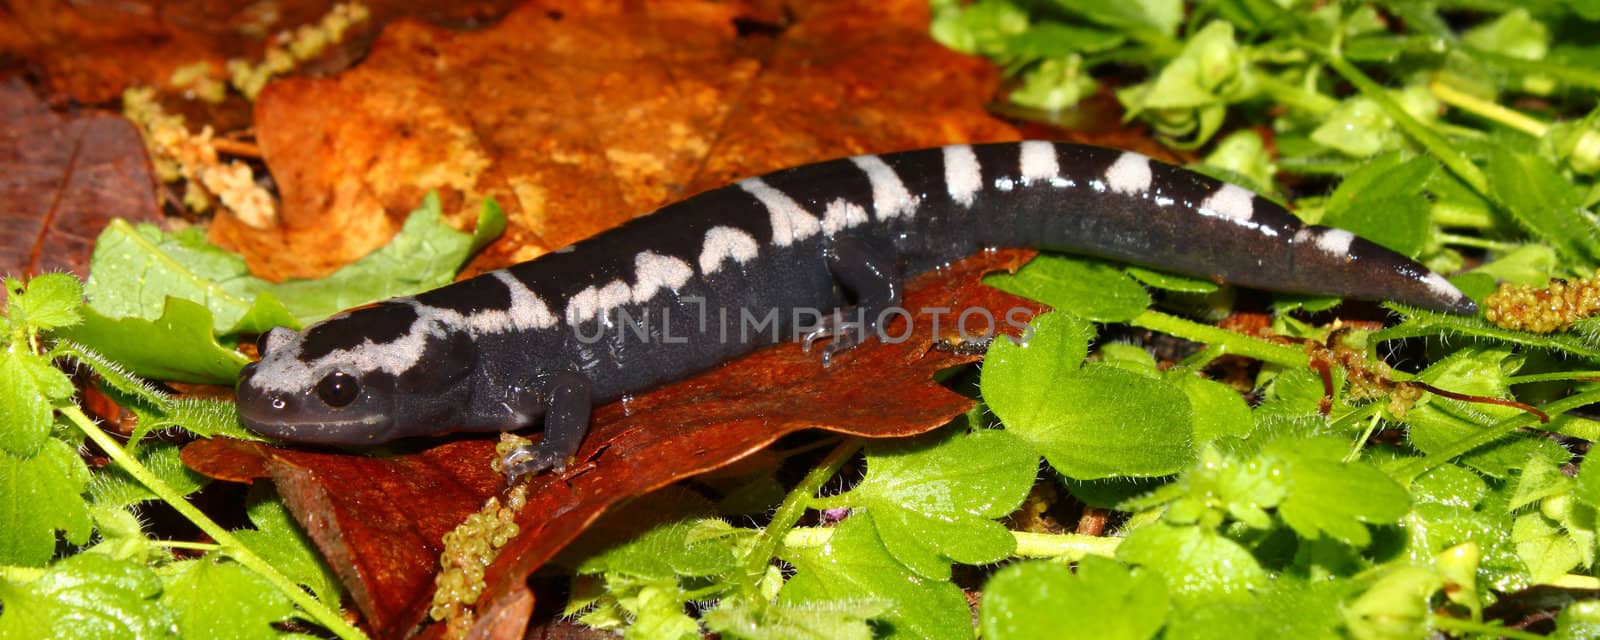 A Marbled Salamander (Ambystoma opacum) at Monte Sano State Park in Alabama.